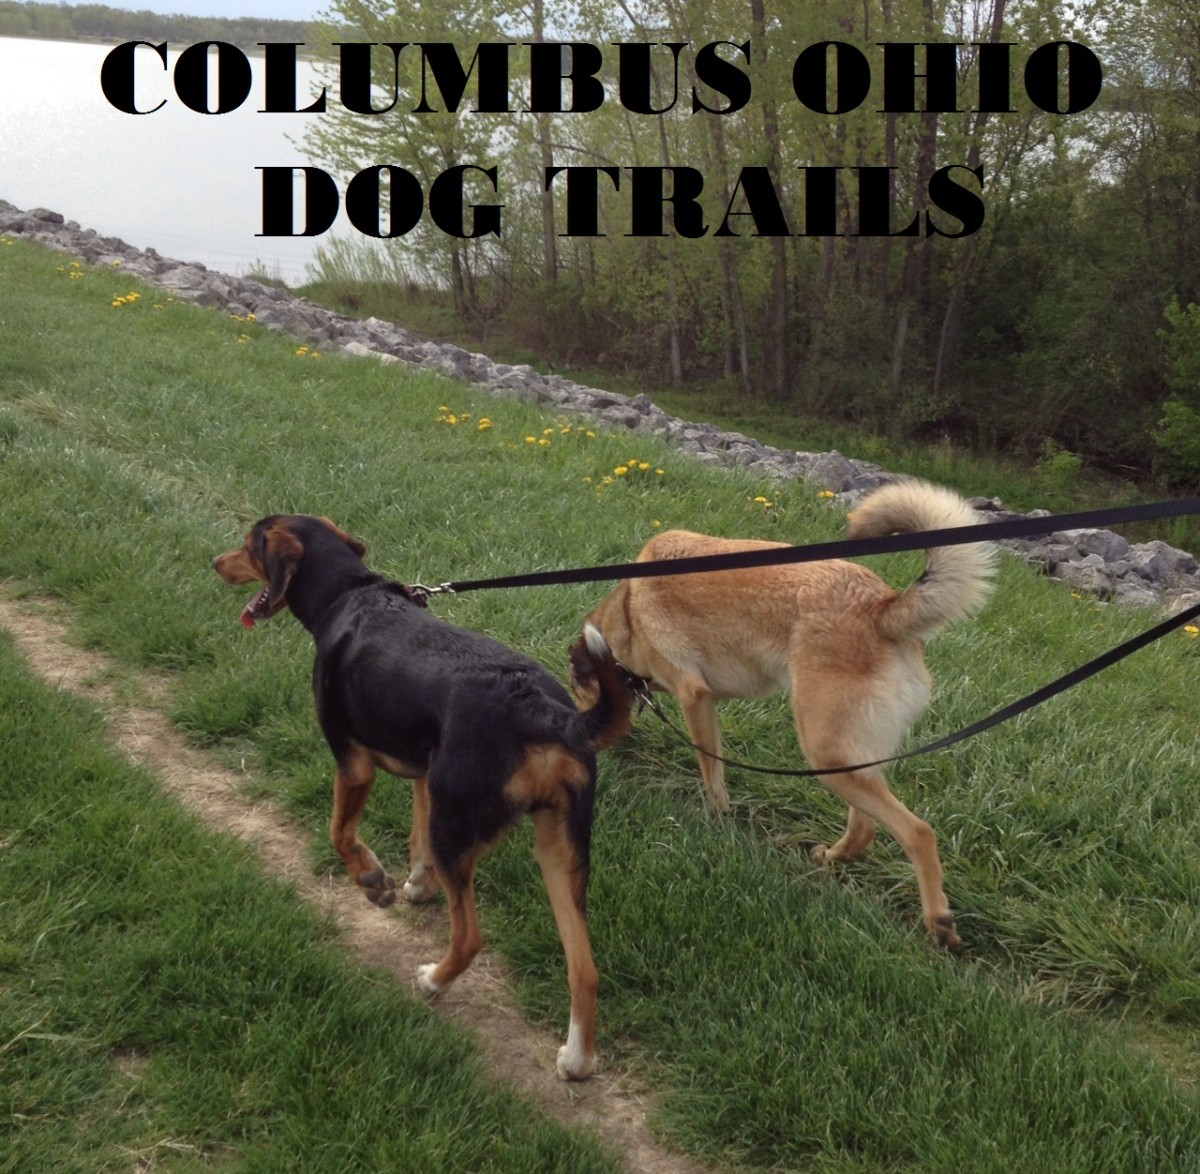 Five Great Places to Hike With Your Dog Near Columbus